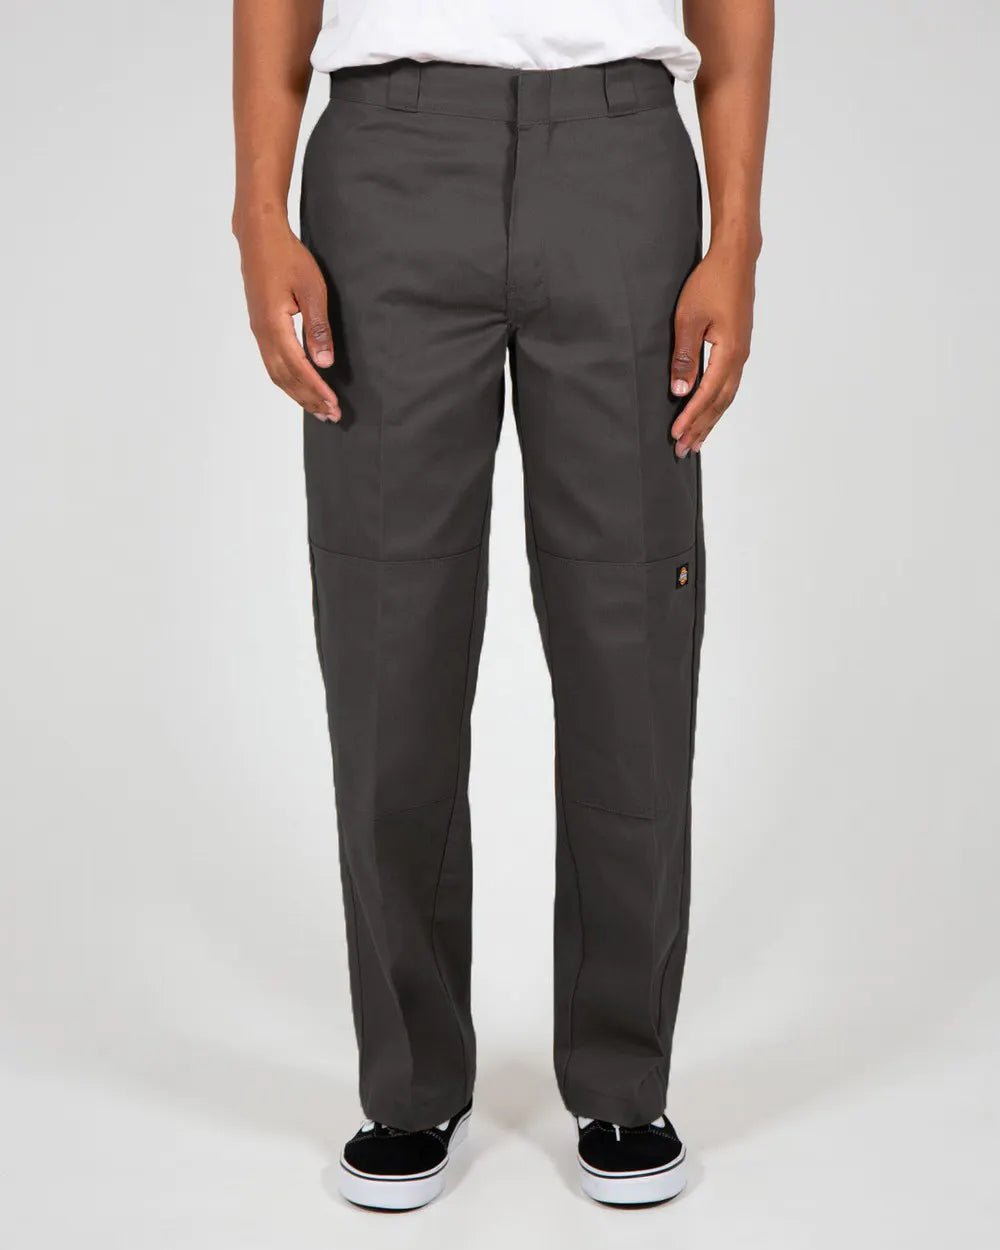 Loose Fit Double Knee Work Pant - Charcoal